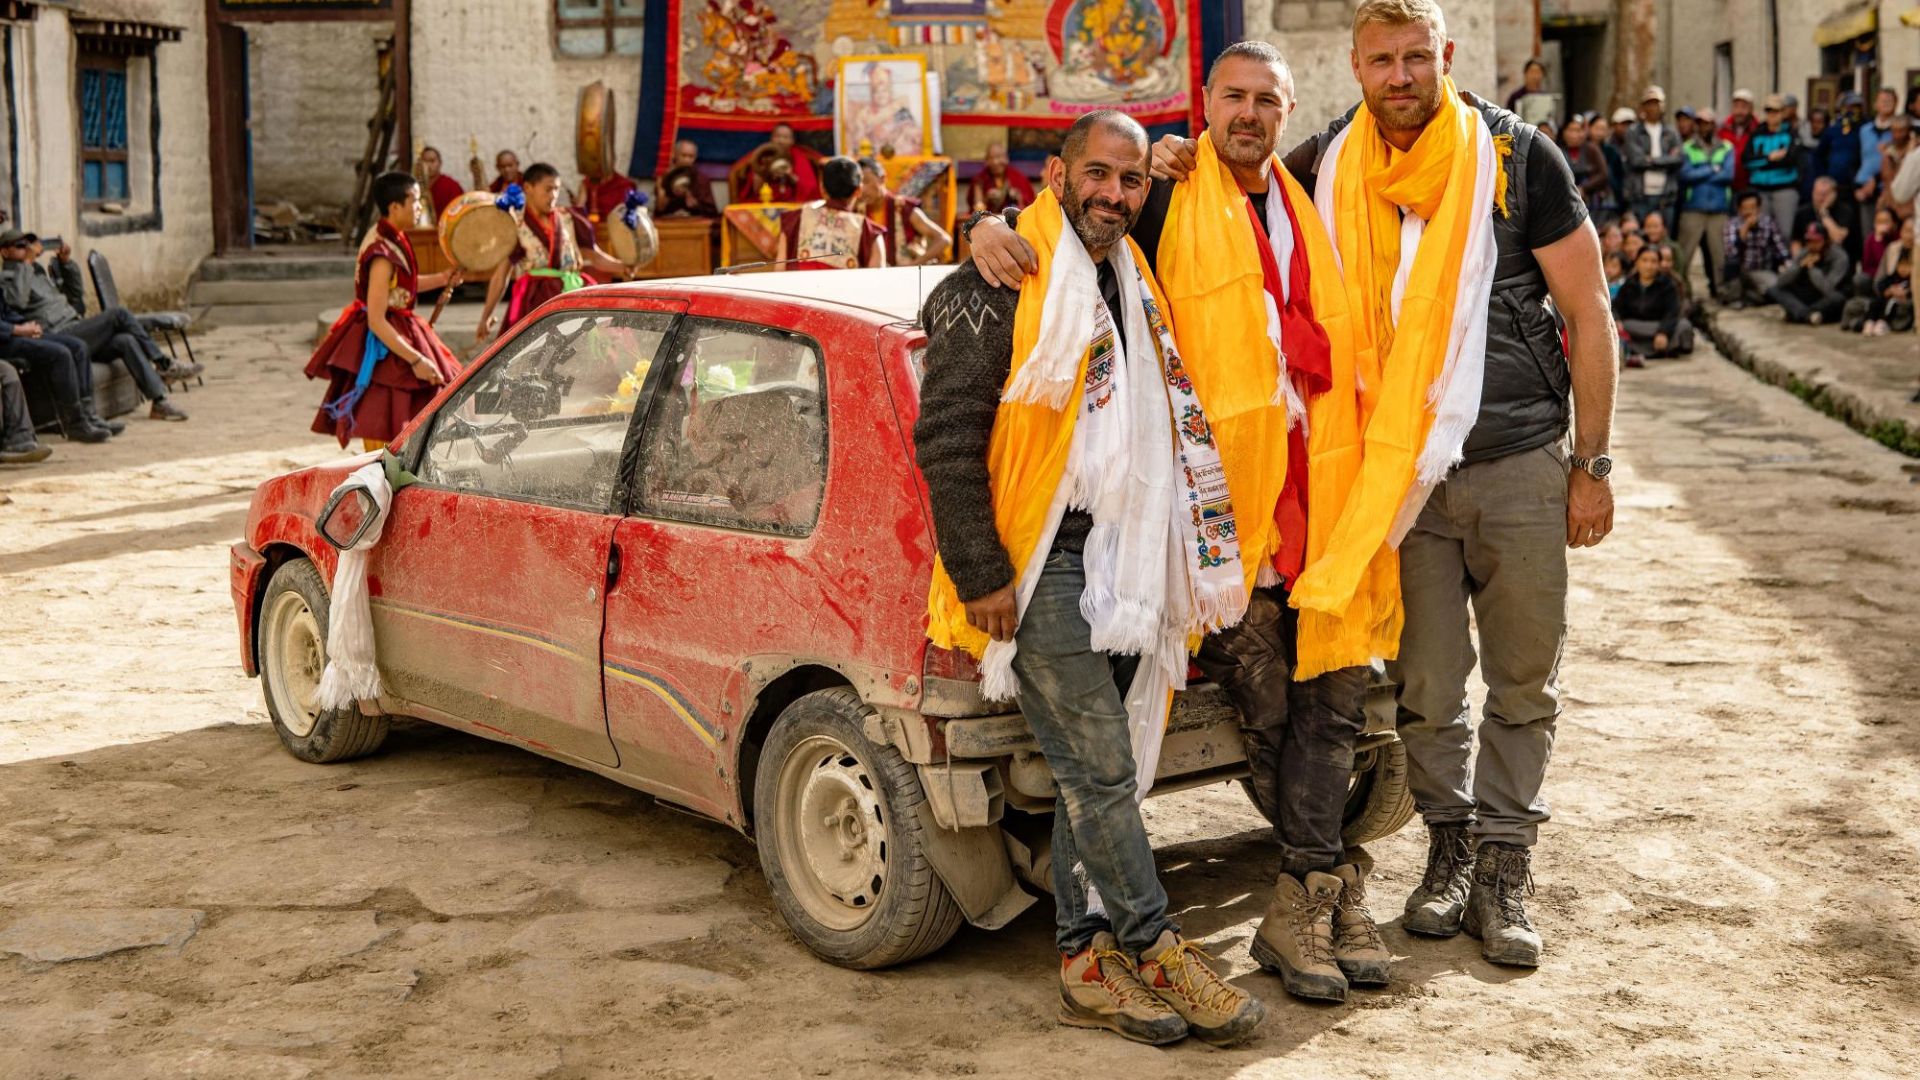 See Top Gear cars from Nepal special at Beaulieu - Motoring Research